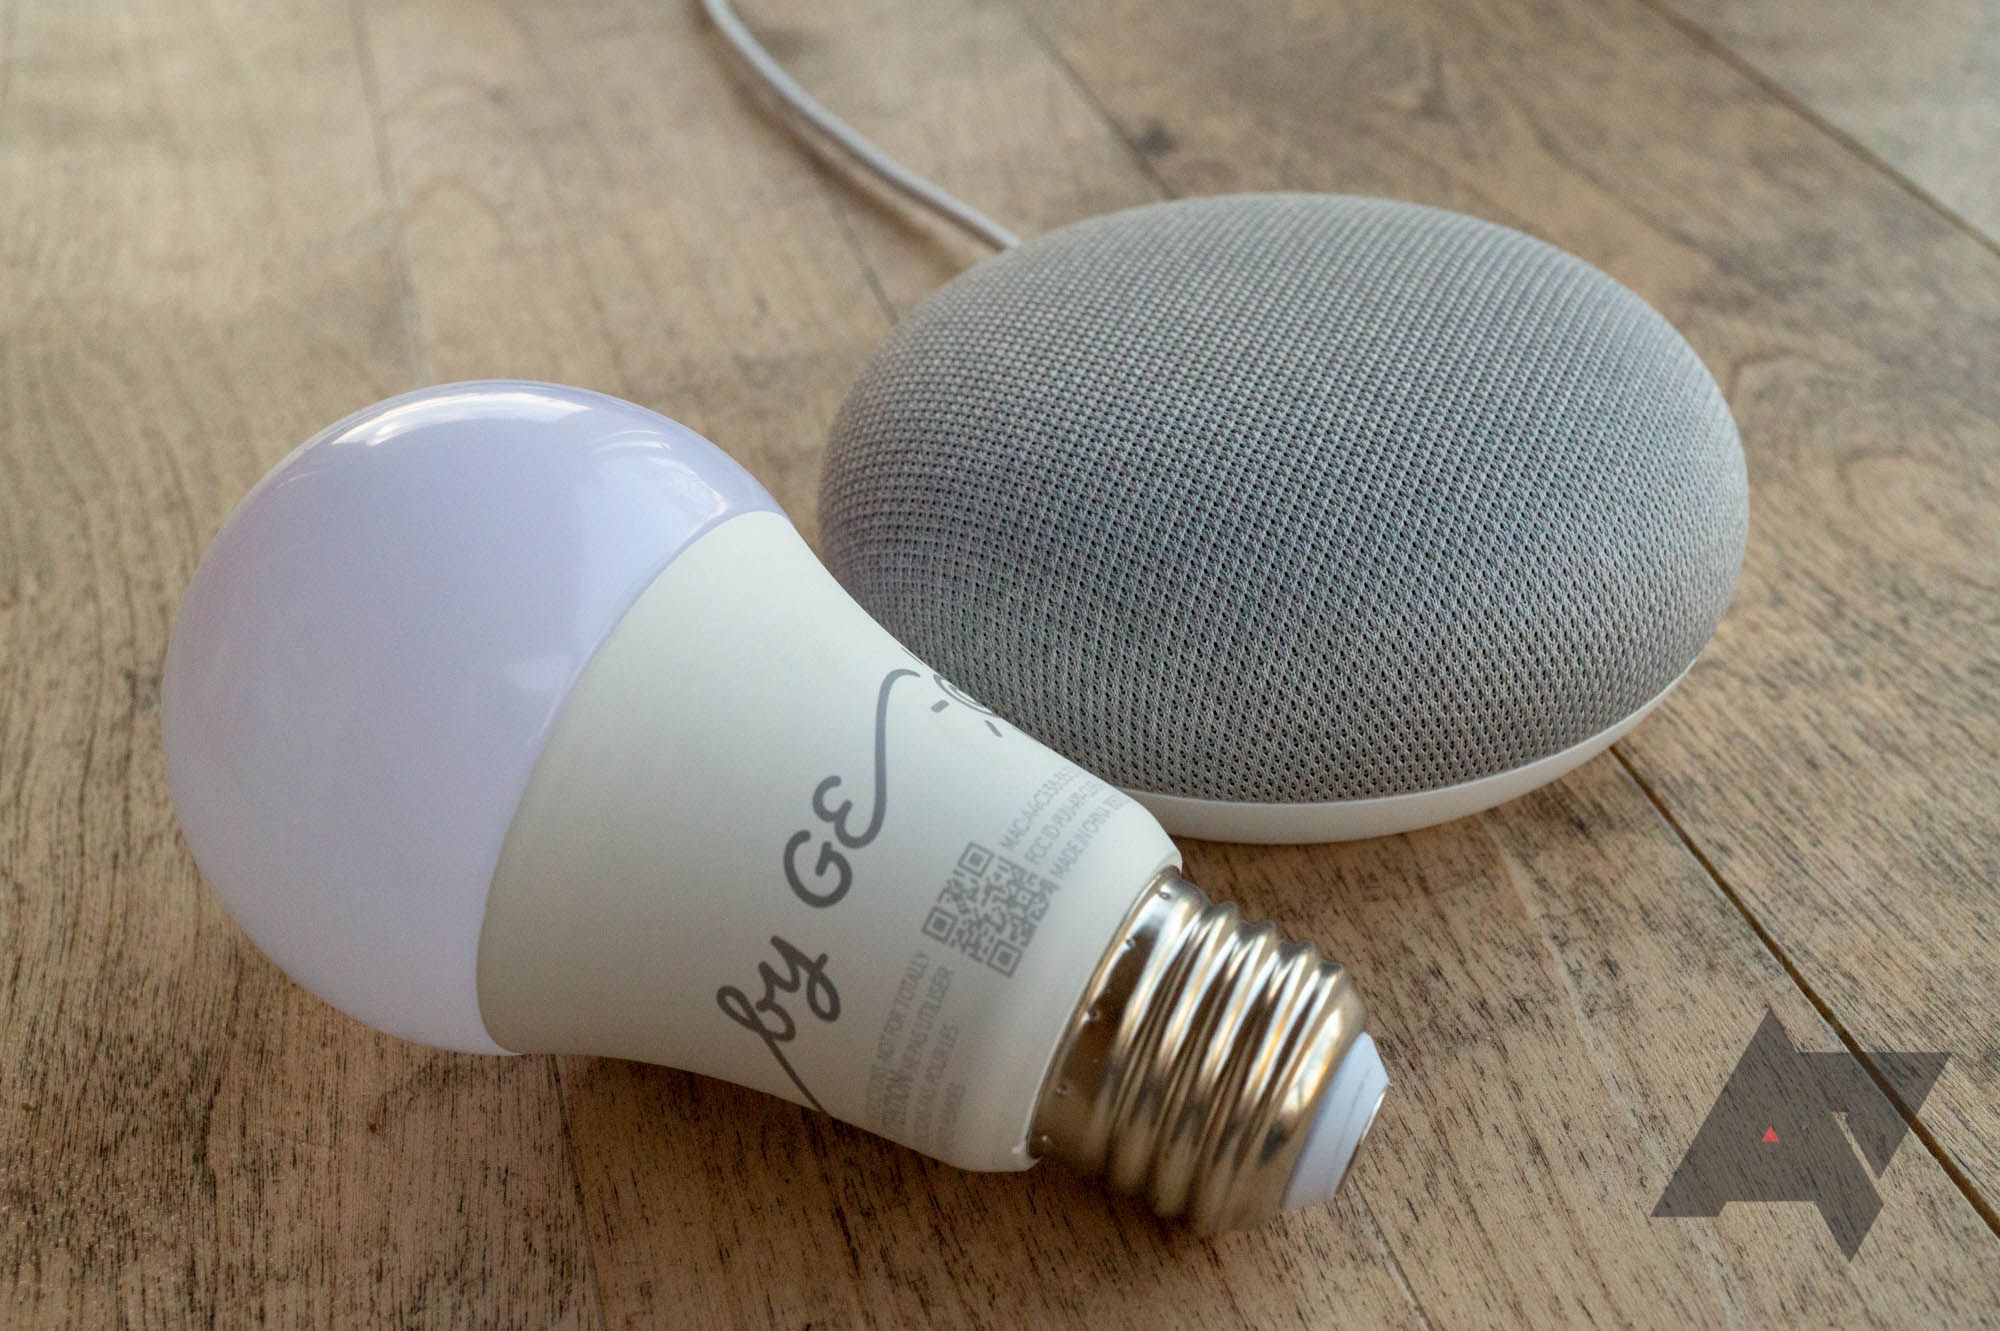 The best light bulbs that with Google Home